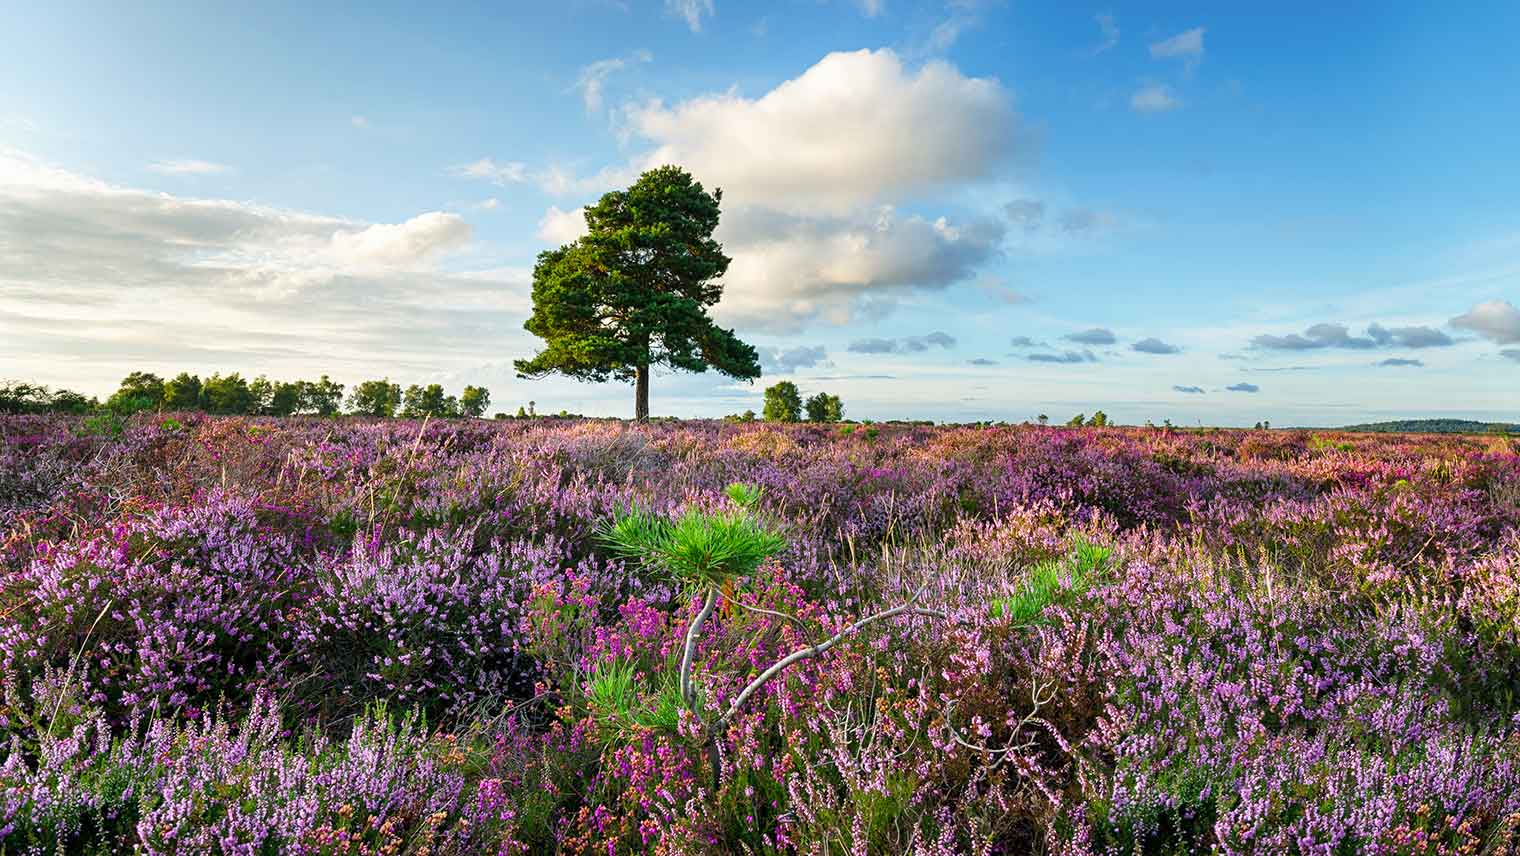 Heather in New Forest